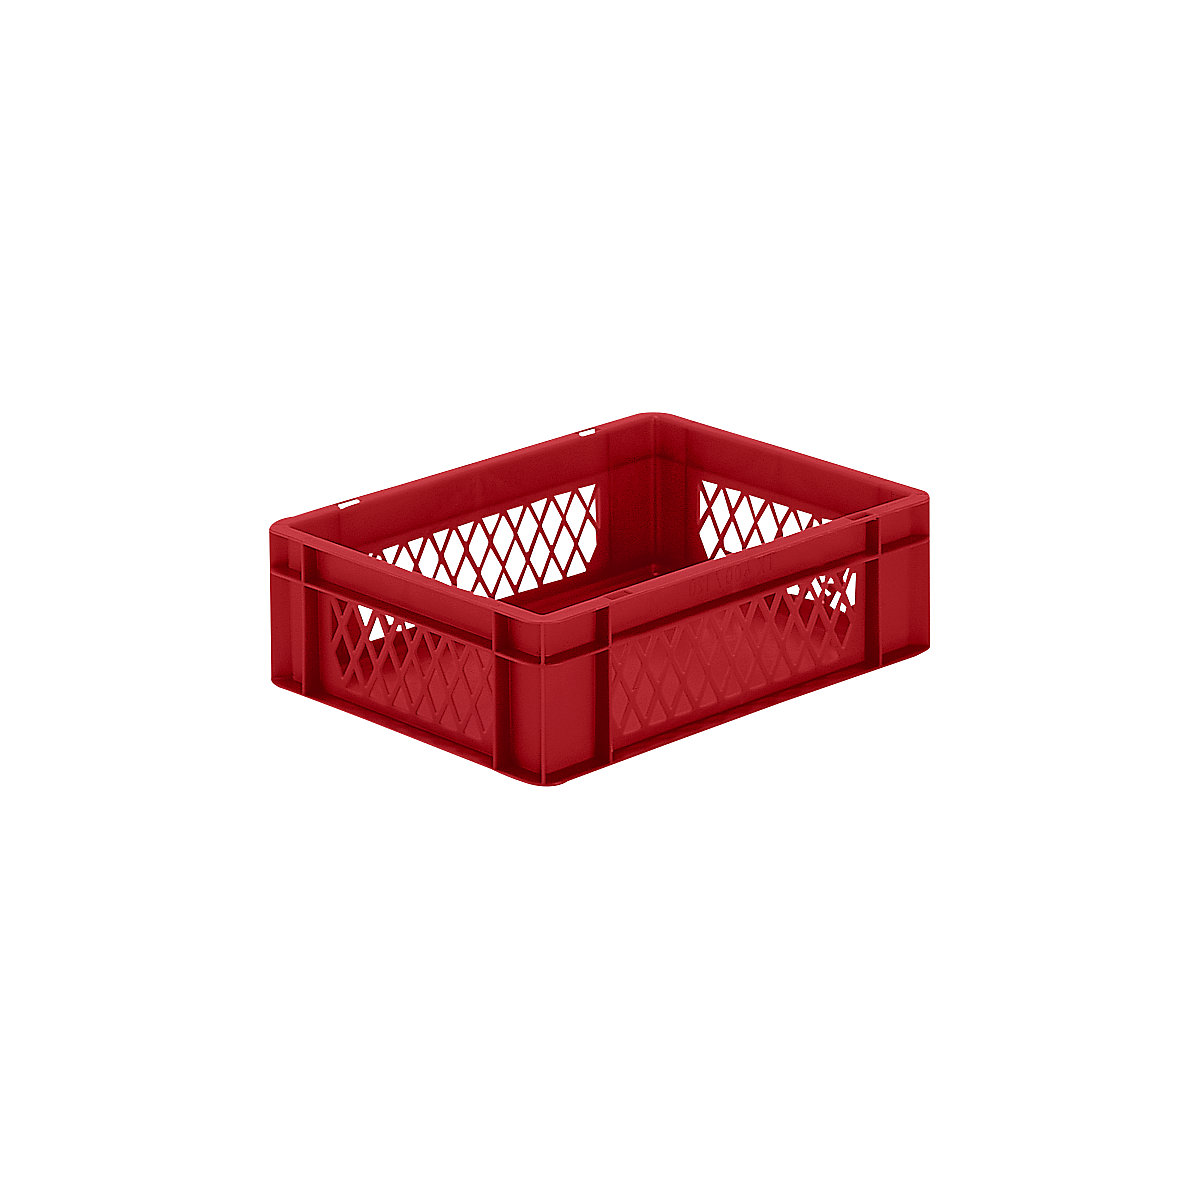 Euro stacking container, perforated walls, closed base, LxWxH 400 x 300 x 120 mm, red, pack of 5-7